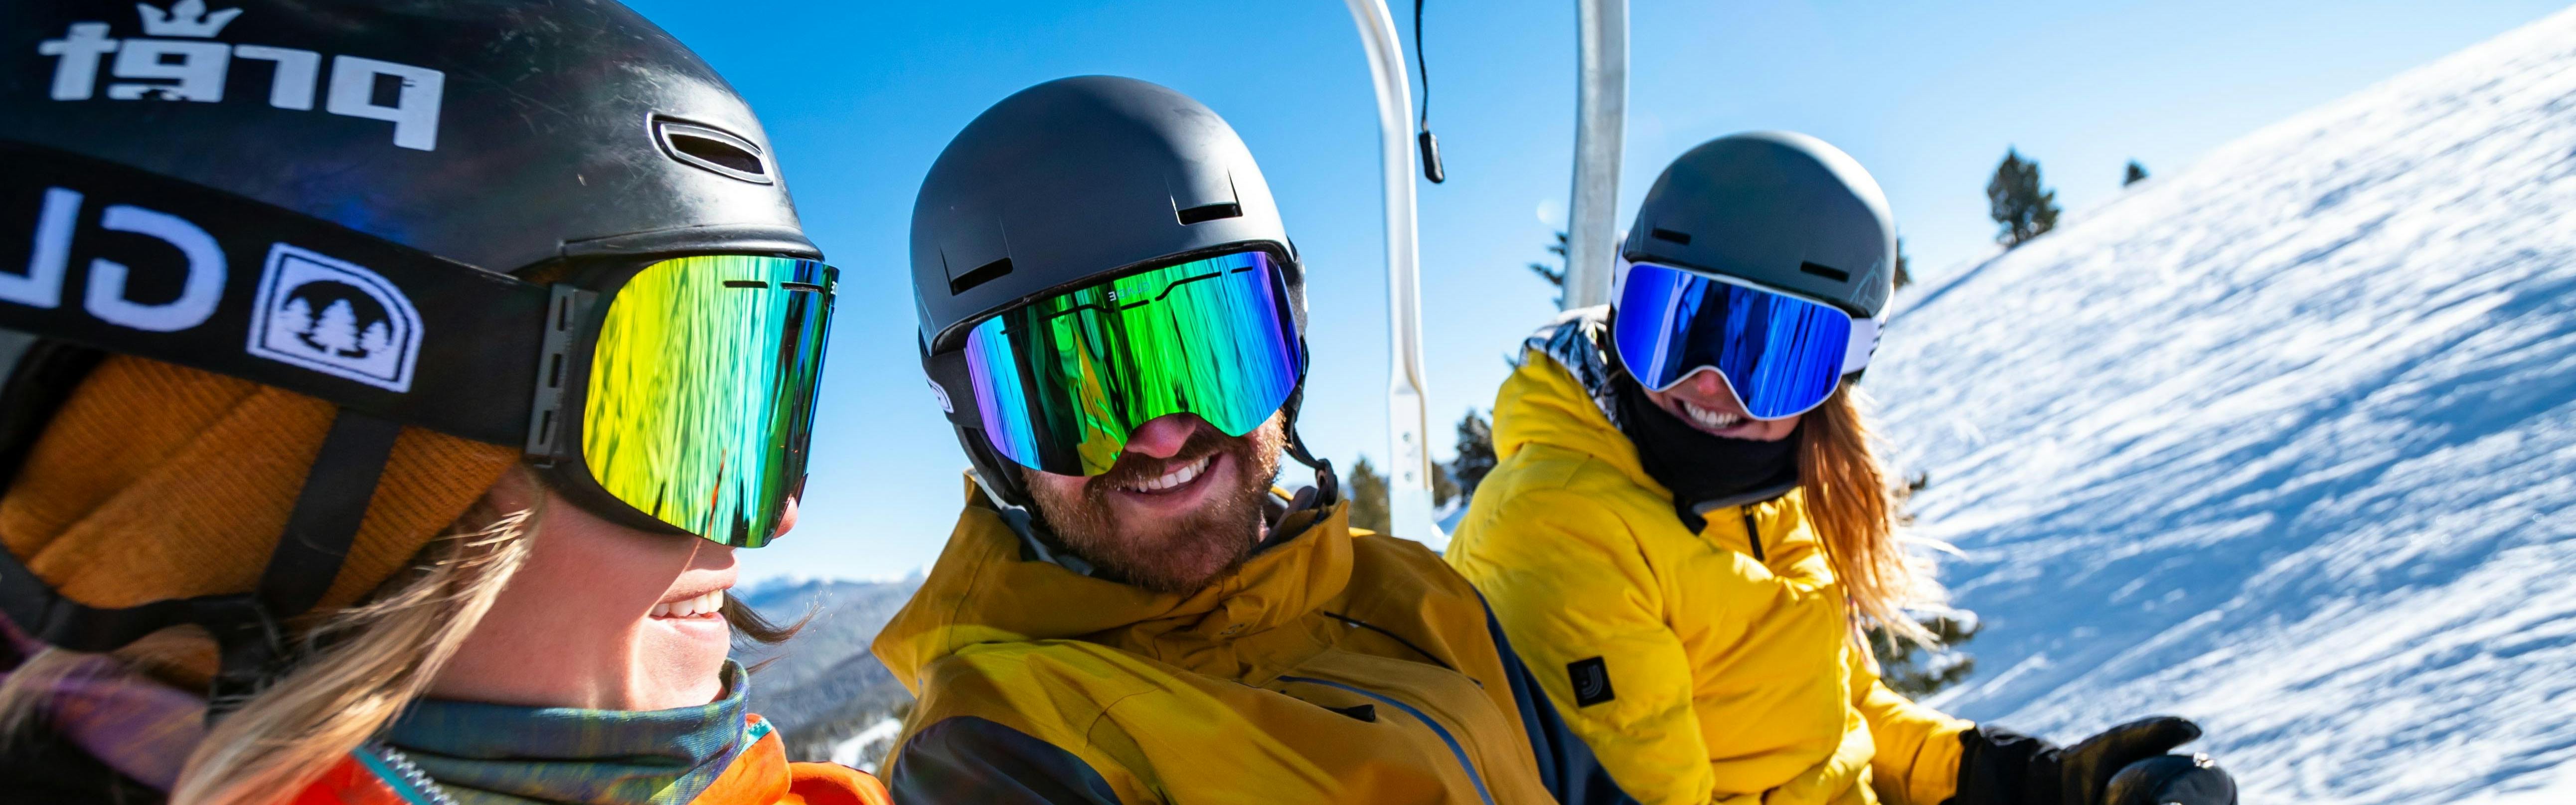 Best Ski Goggles For The Backcountry 